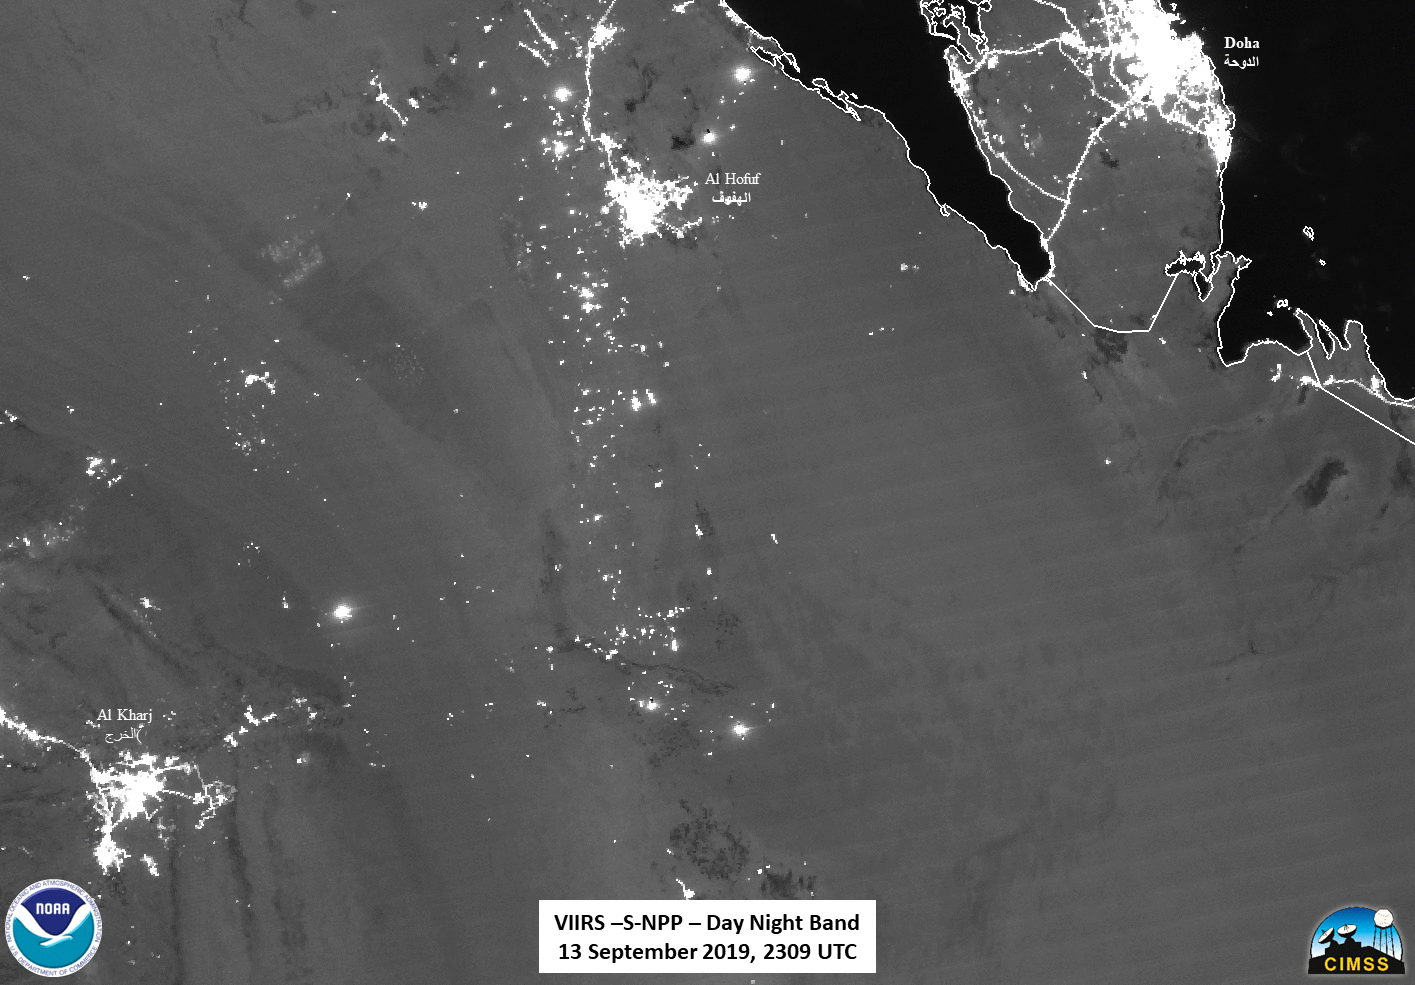 VIIRS Day/Night Band (0.7 µm) and Visible (0.64 µm) imagery from Suomi NPP and NOAA-20 [click to enlarge]